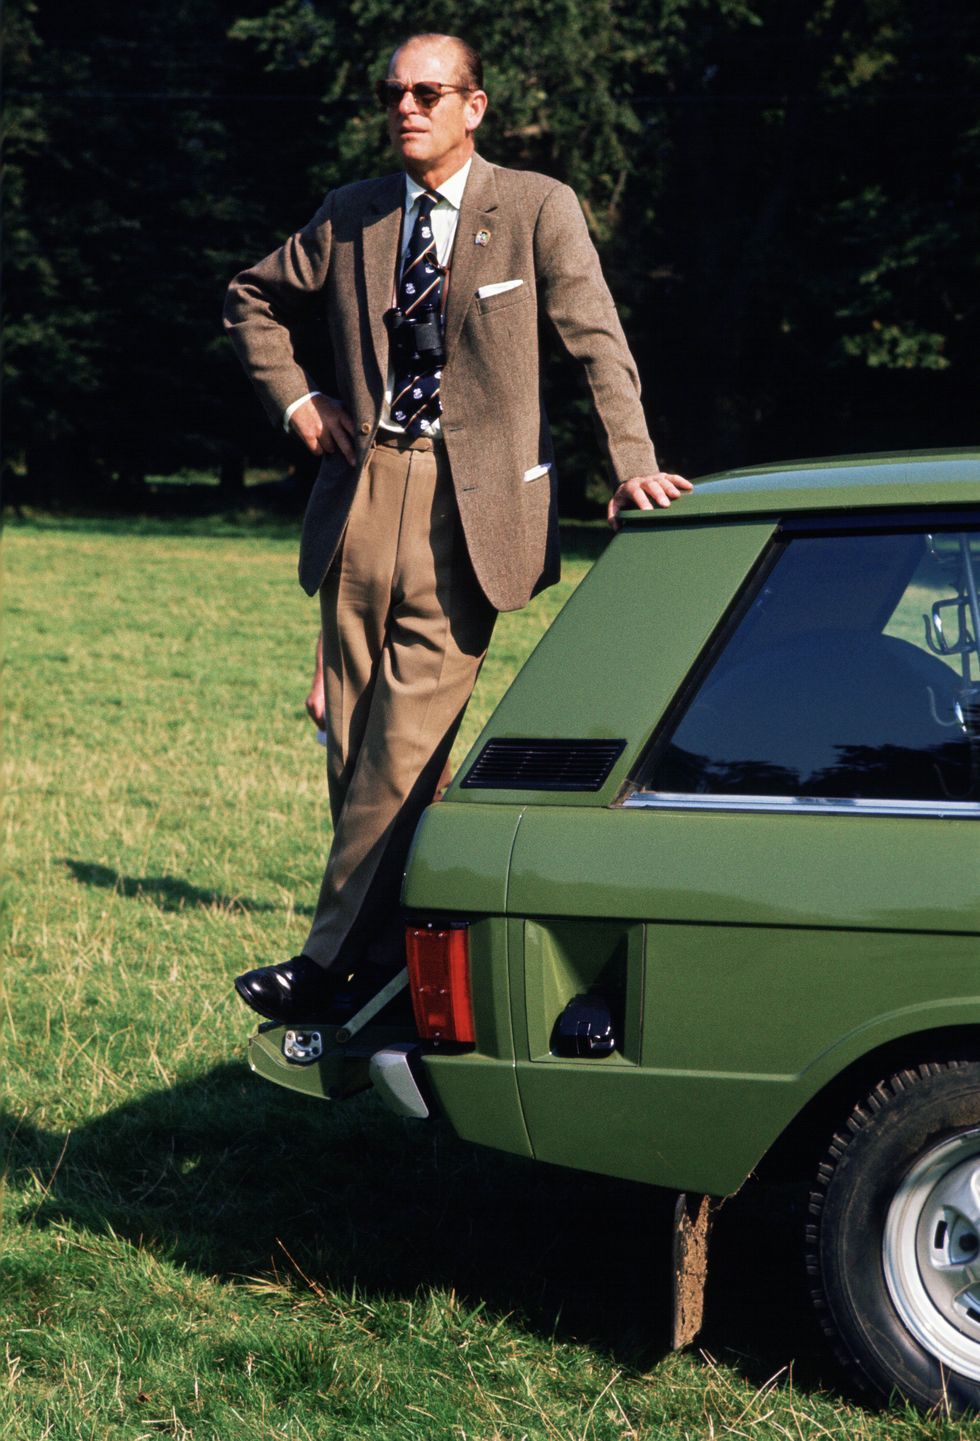 great britain   may 01  prince philip, duke of edinburgh, standing on his range rover car at the royal windsor horse show  photo by tim graham photo library via getty images